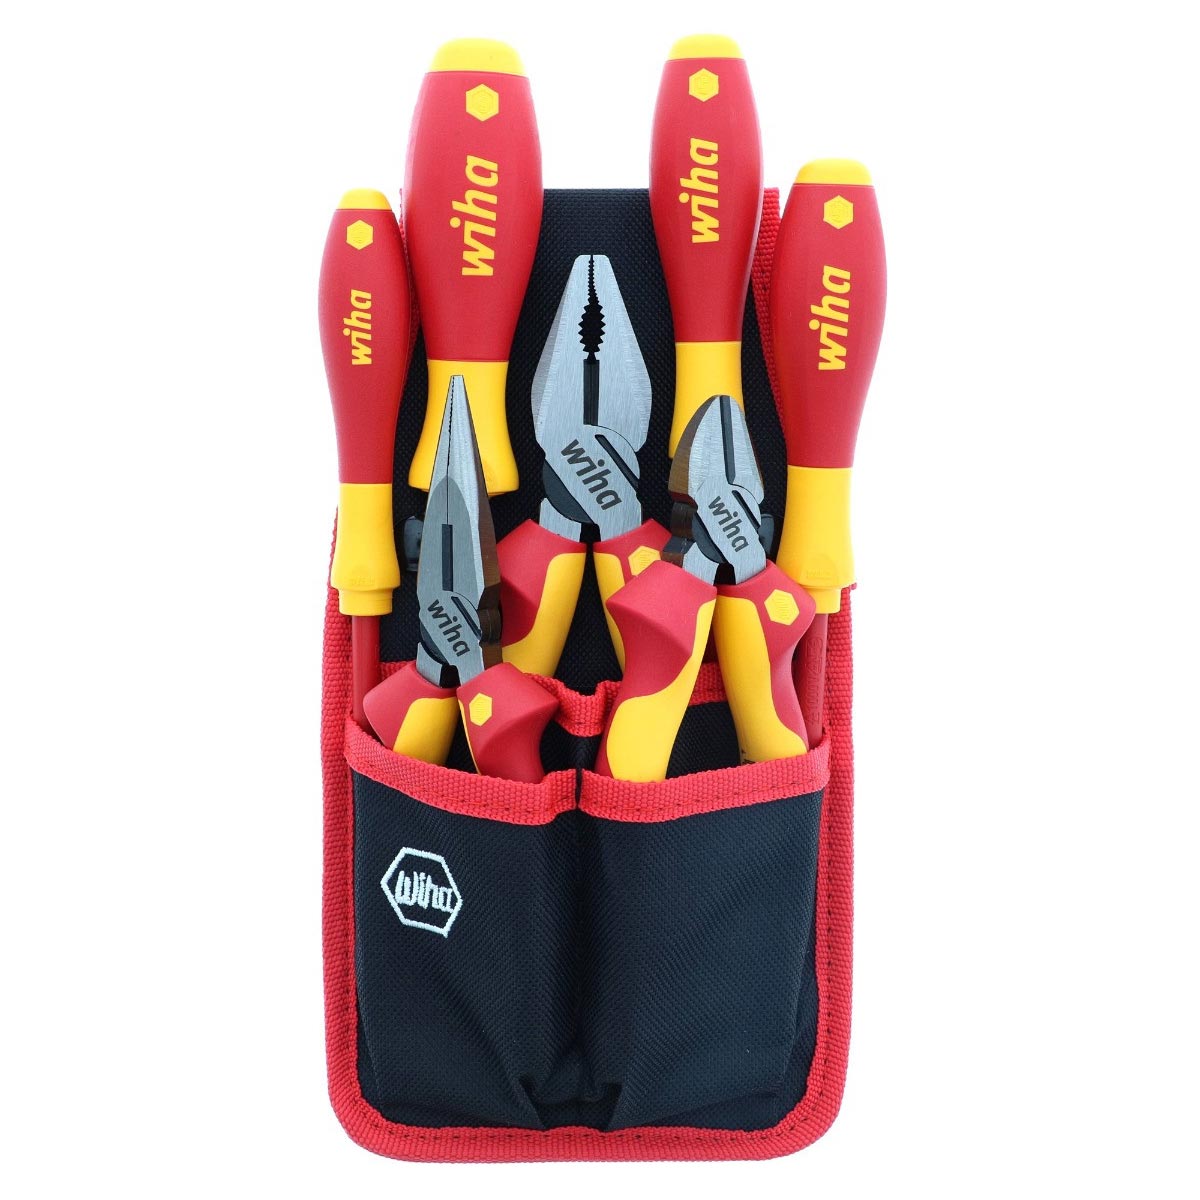 7 PIECE INSULATED INDUSTRIAL PLIERS AND SCREWDRIVER SET